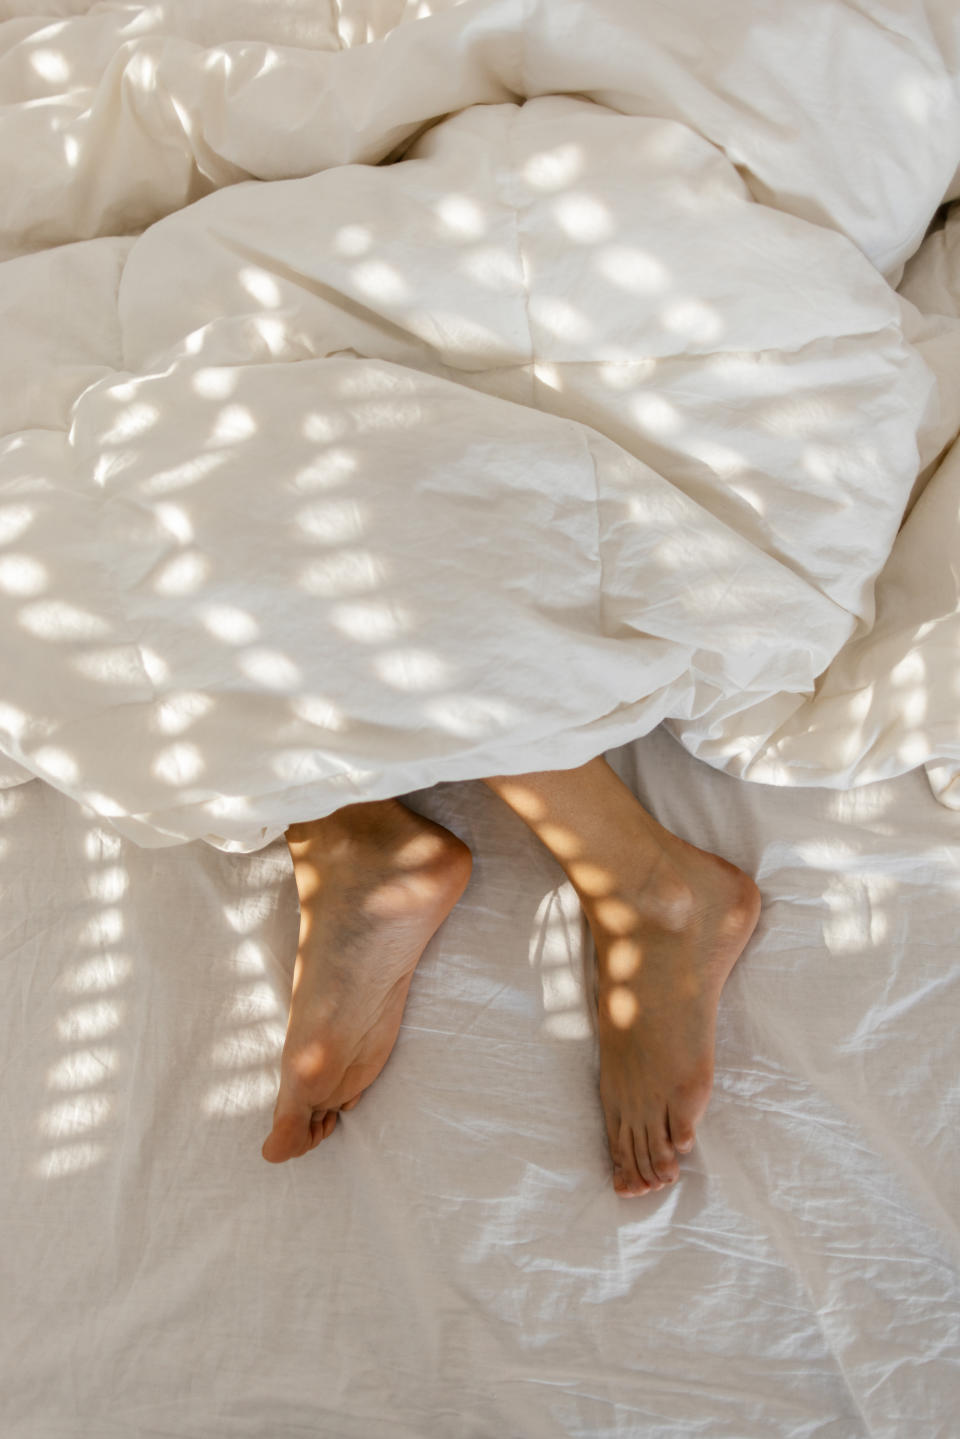 Person's bare feet sticking out from under a light blanket with sunlight filtering through